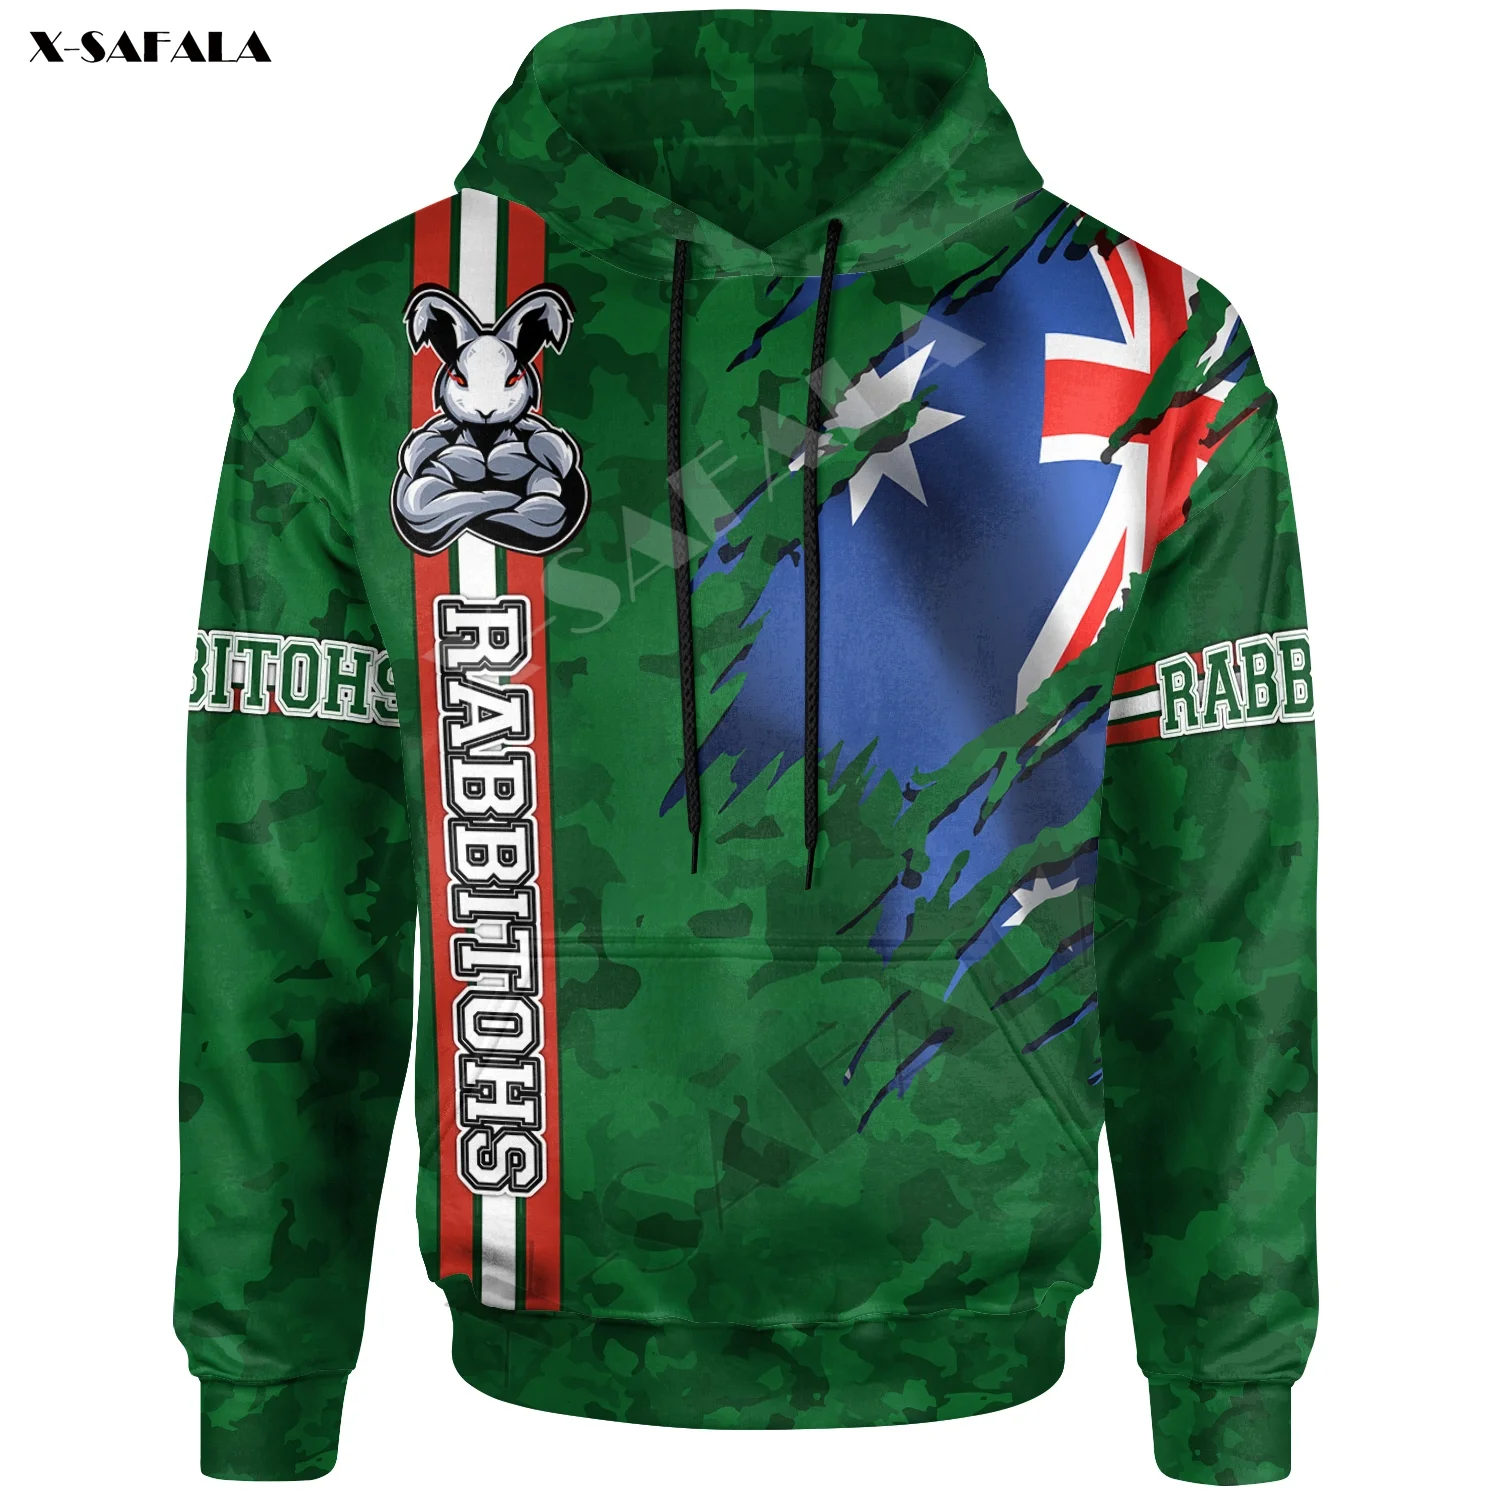 

Rugby Rabbitohs Camouflage Australia Flag 3D Print Zipper Hoodie Men Pullover Sweatshirt Hooded Jersey Tracksuits Outwear Coat